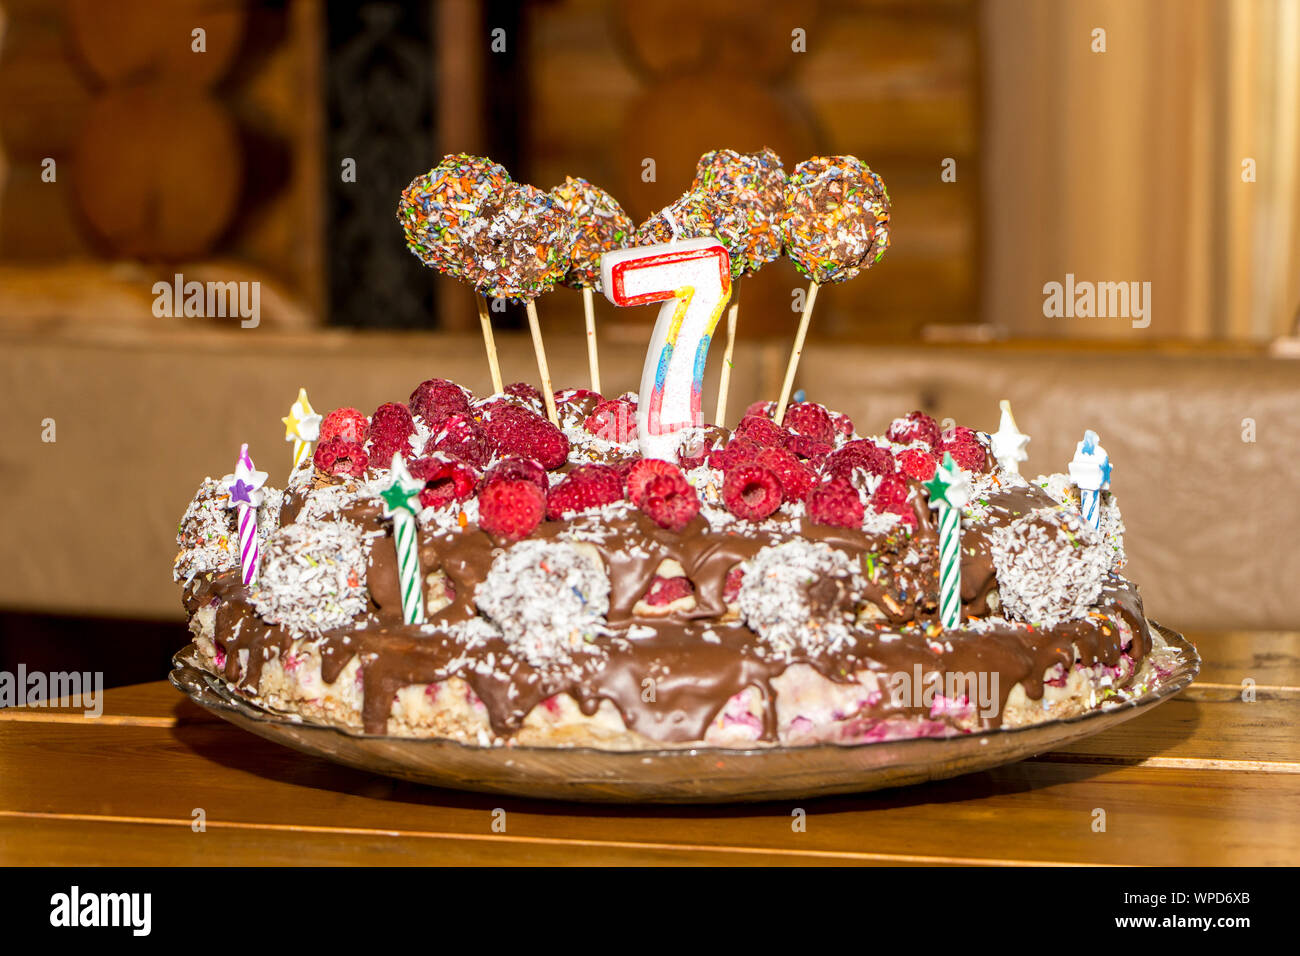 Celebrating the seventh birthday of child. Unbaked natural birthday cake with candles. Stock Photo